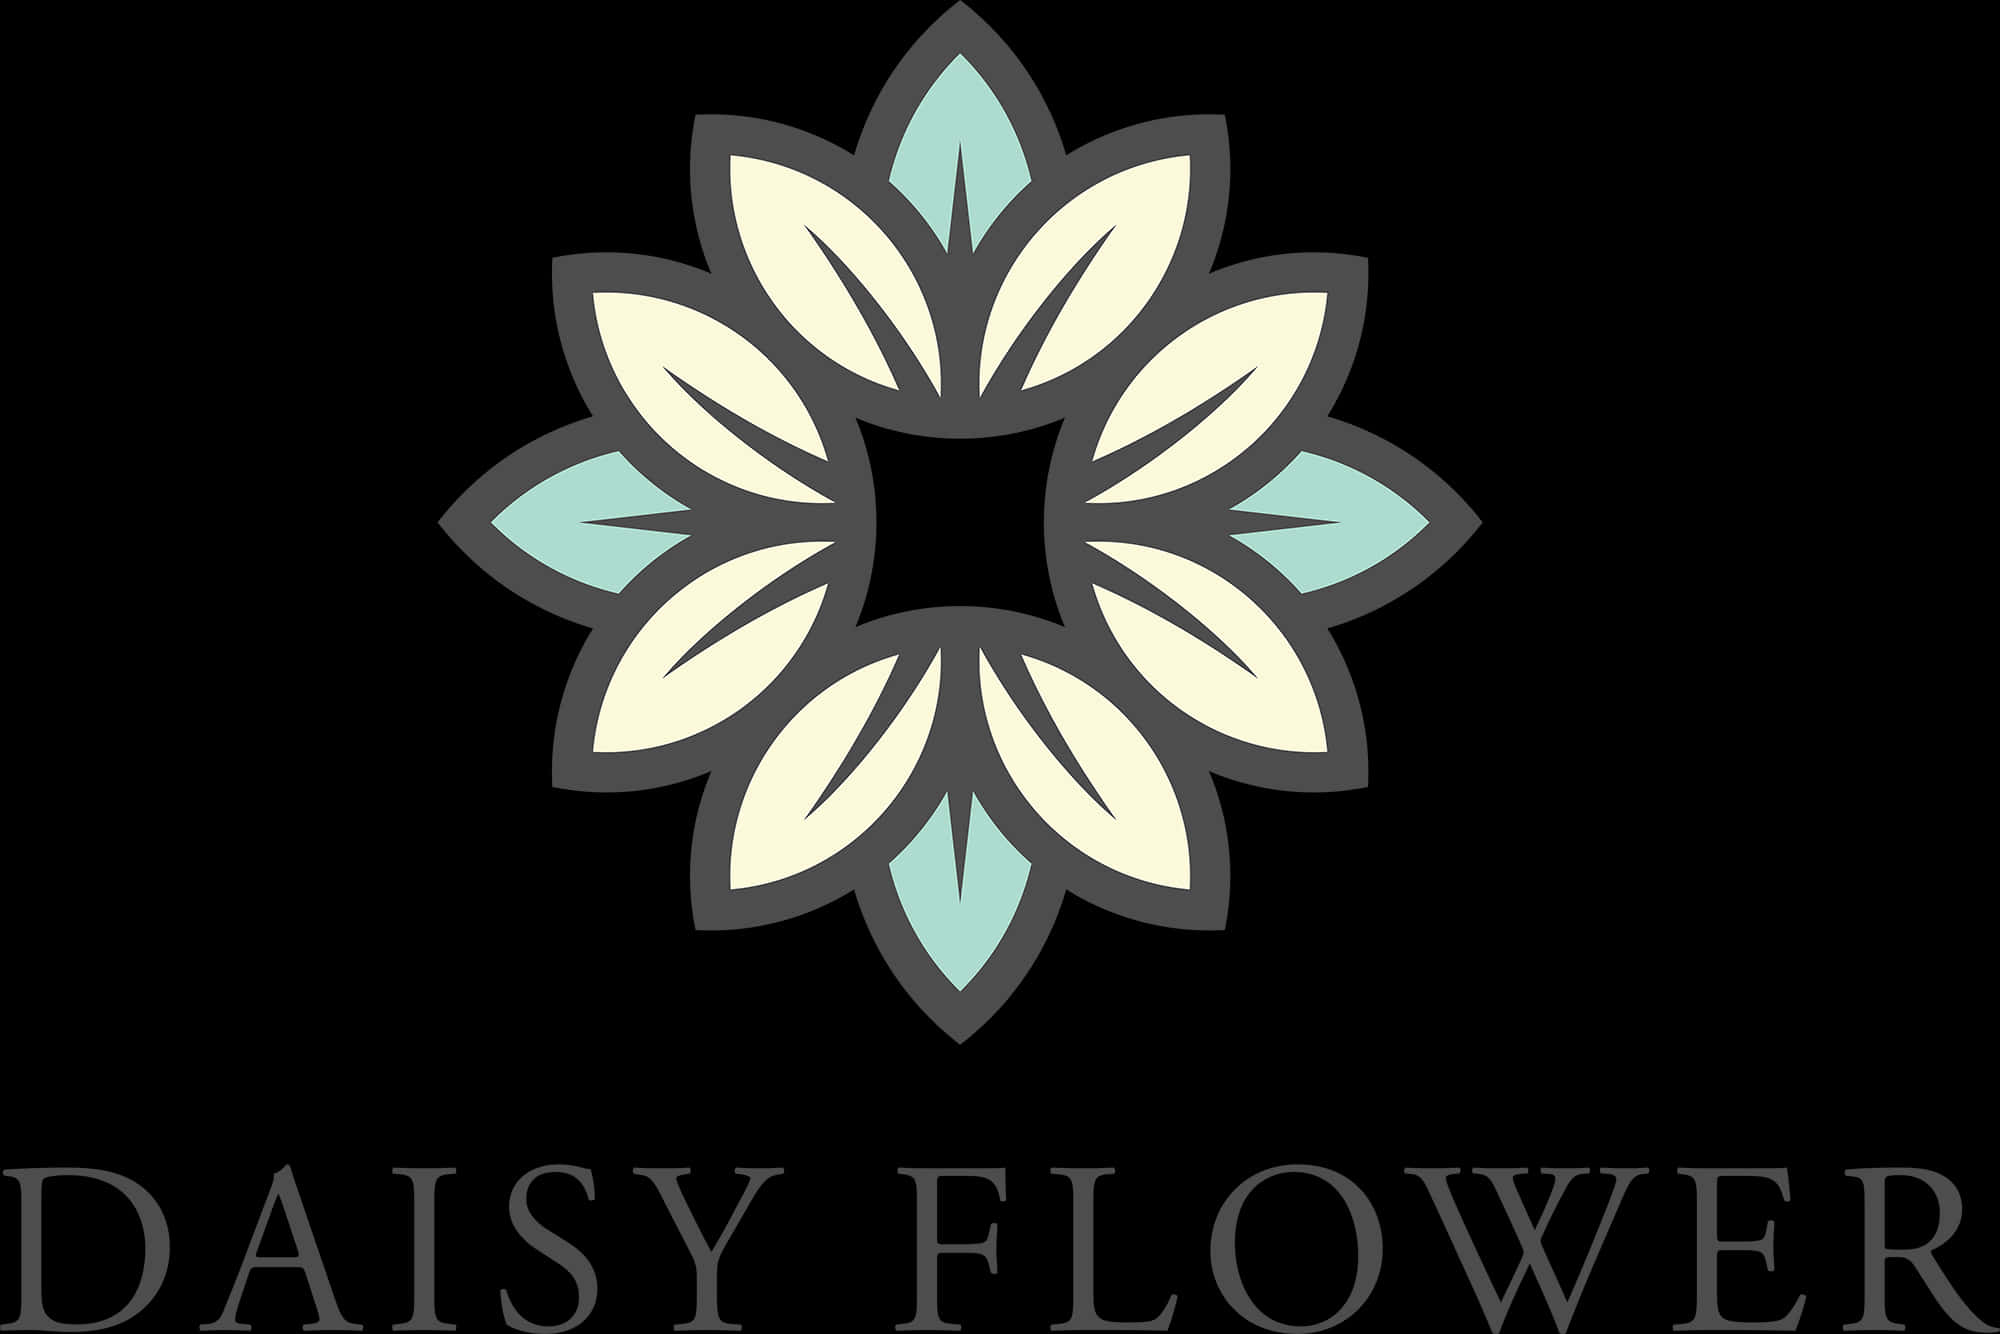 A Logo With A Flower